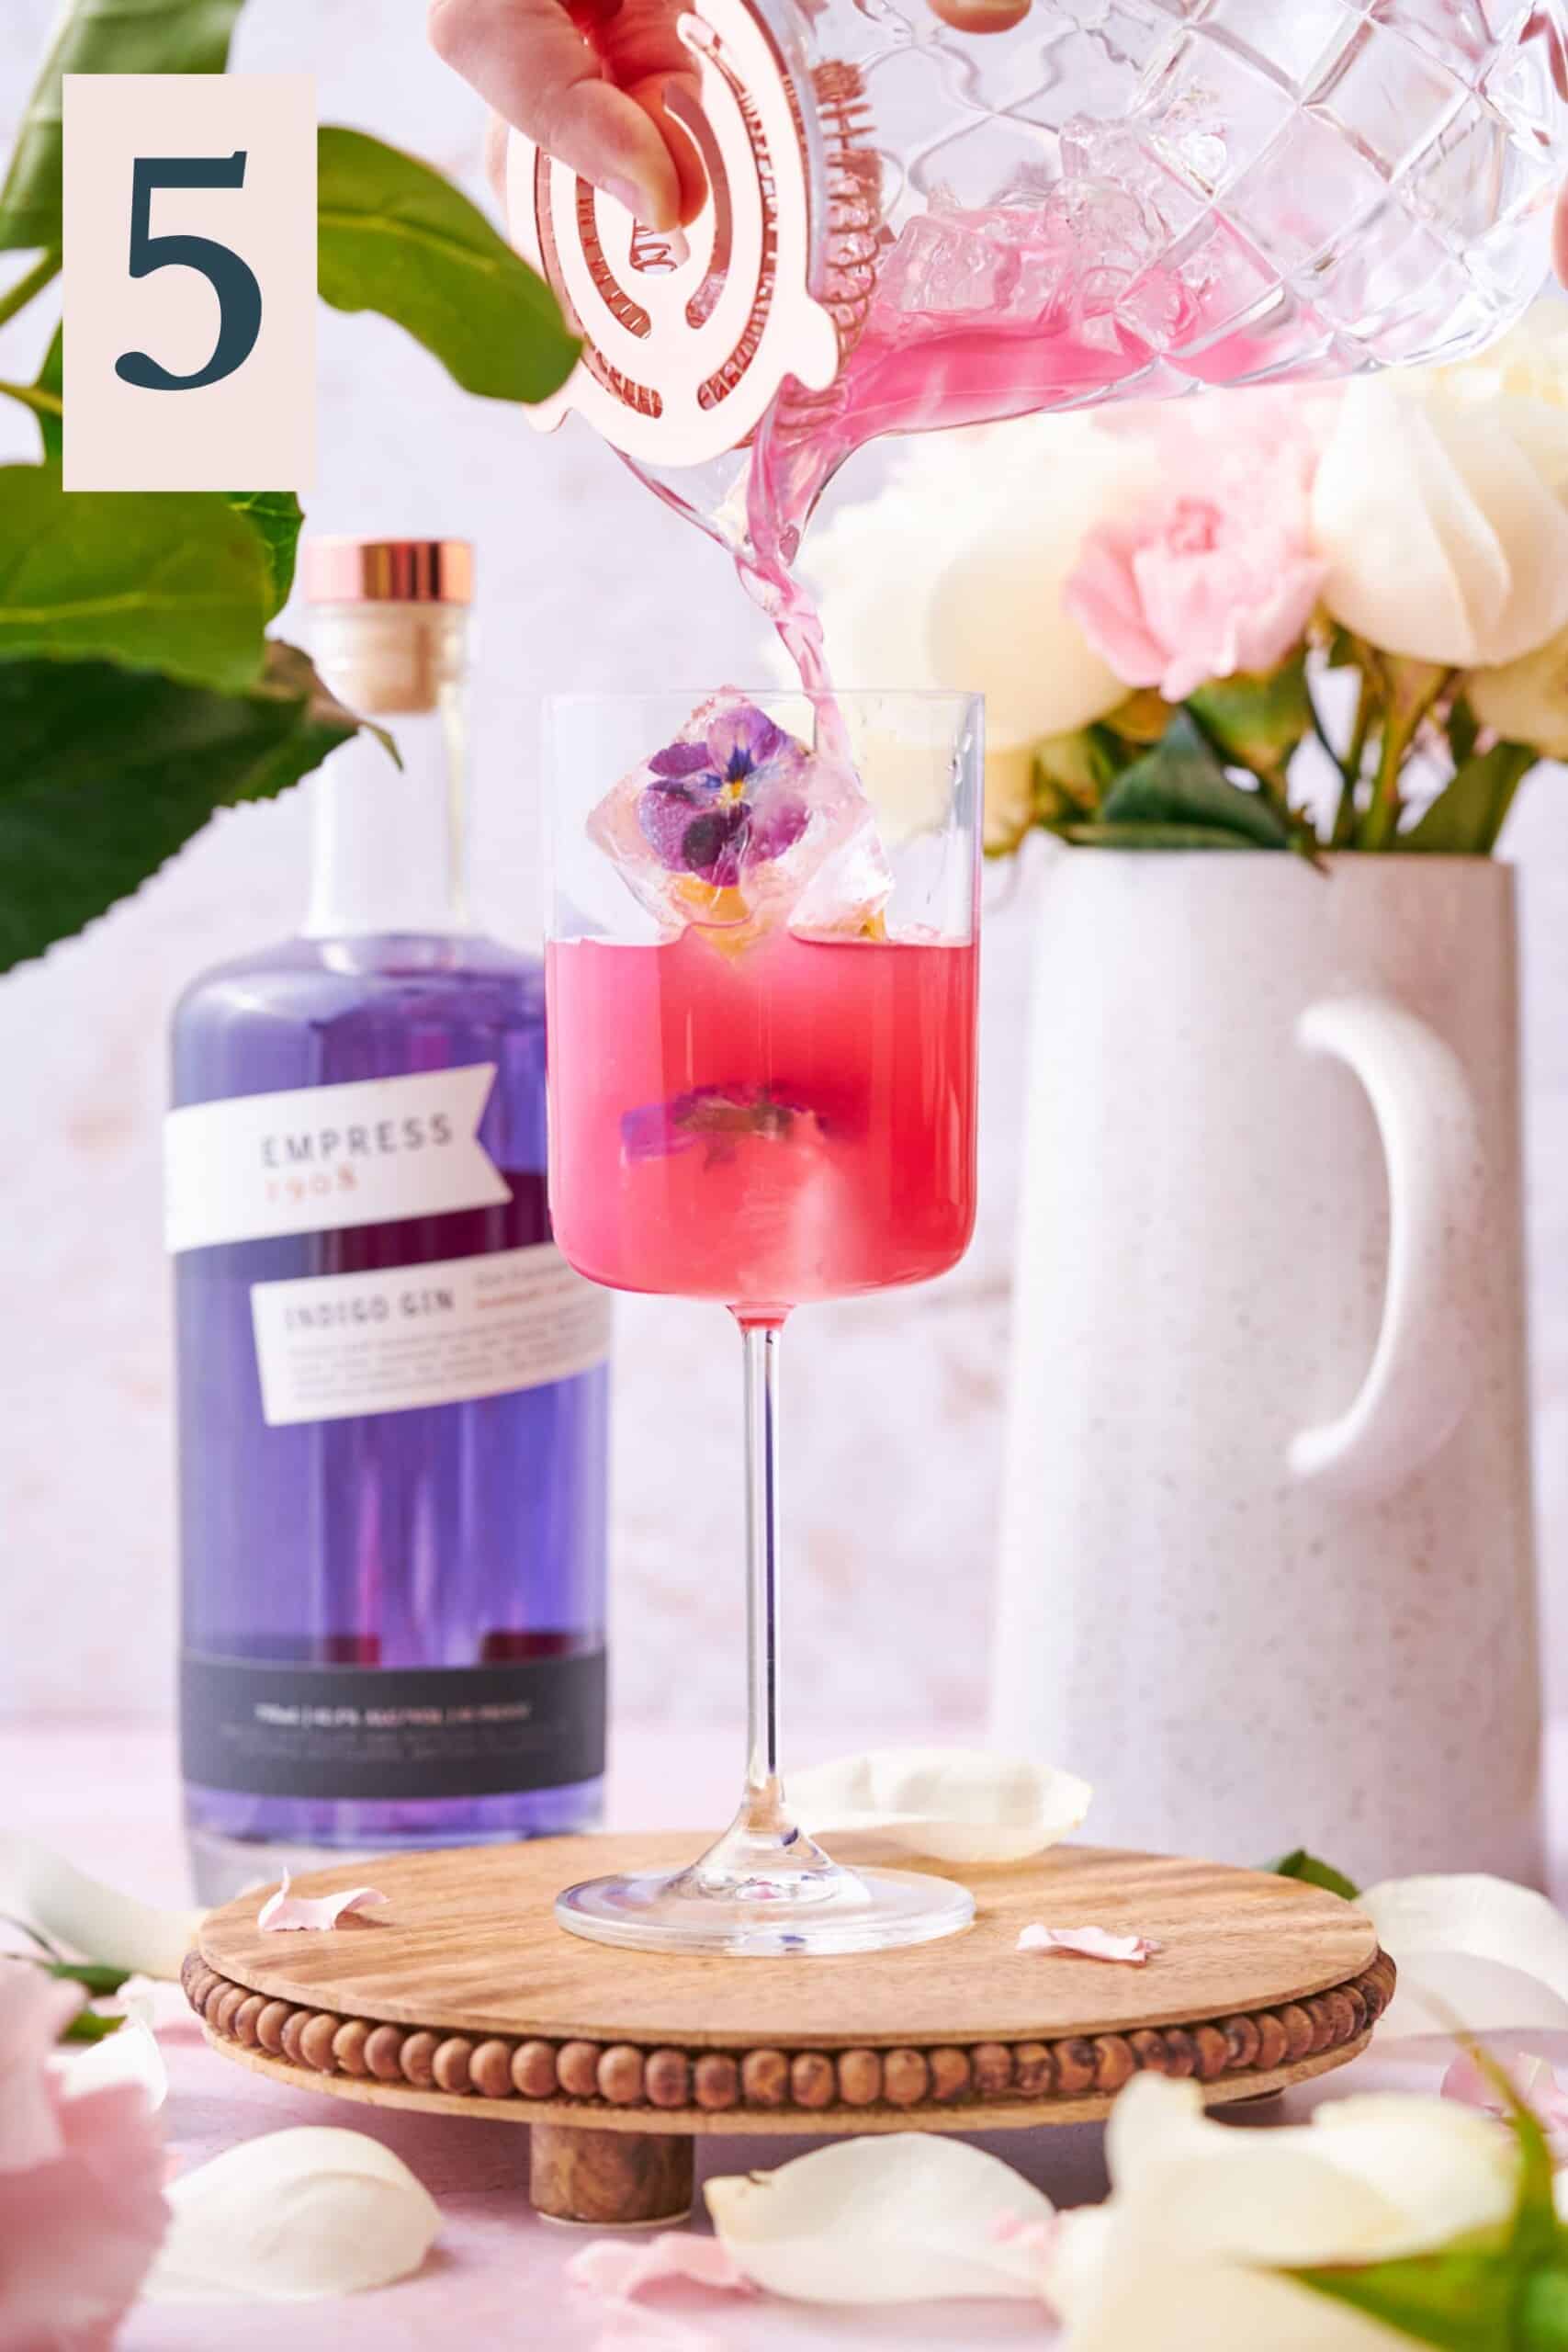 hand pouring bright pink liquid into a glass with floral ice cubes, and Empress gin in the background. 